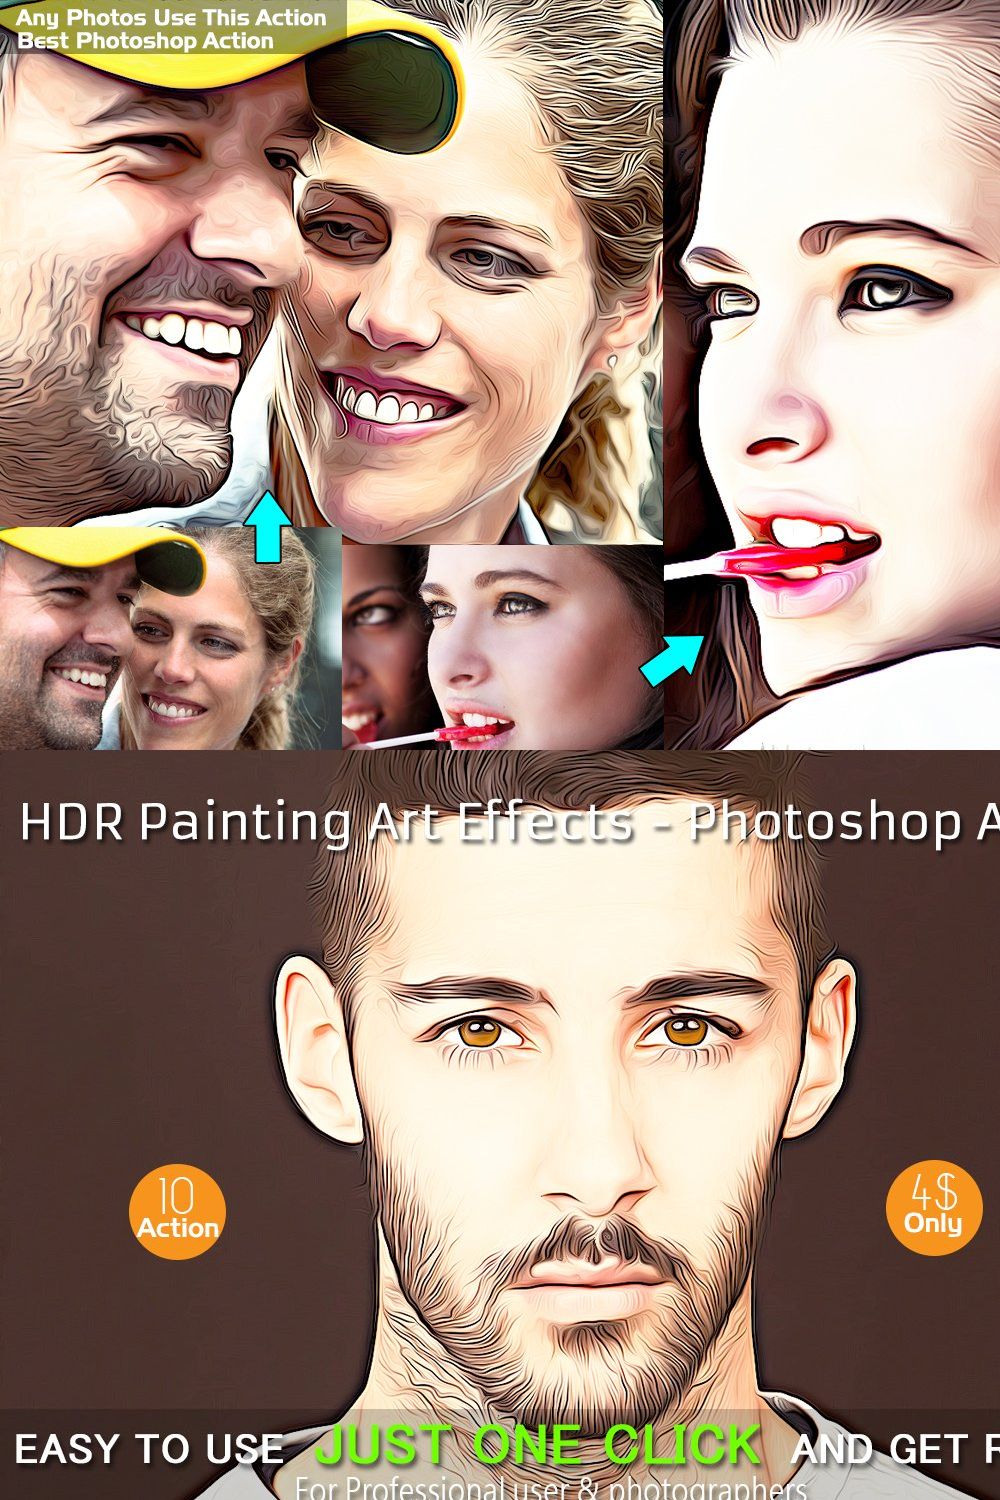 HDR Painting Art Effects - Photoshop pinterest preview image.